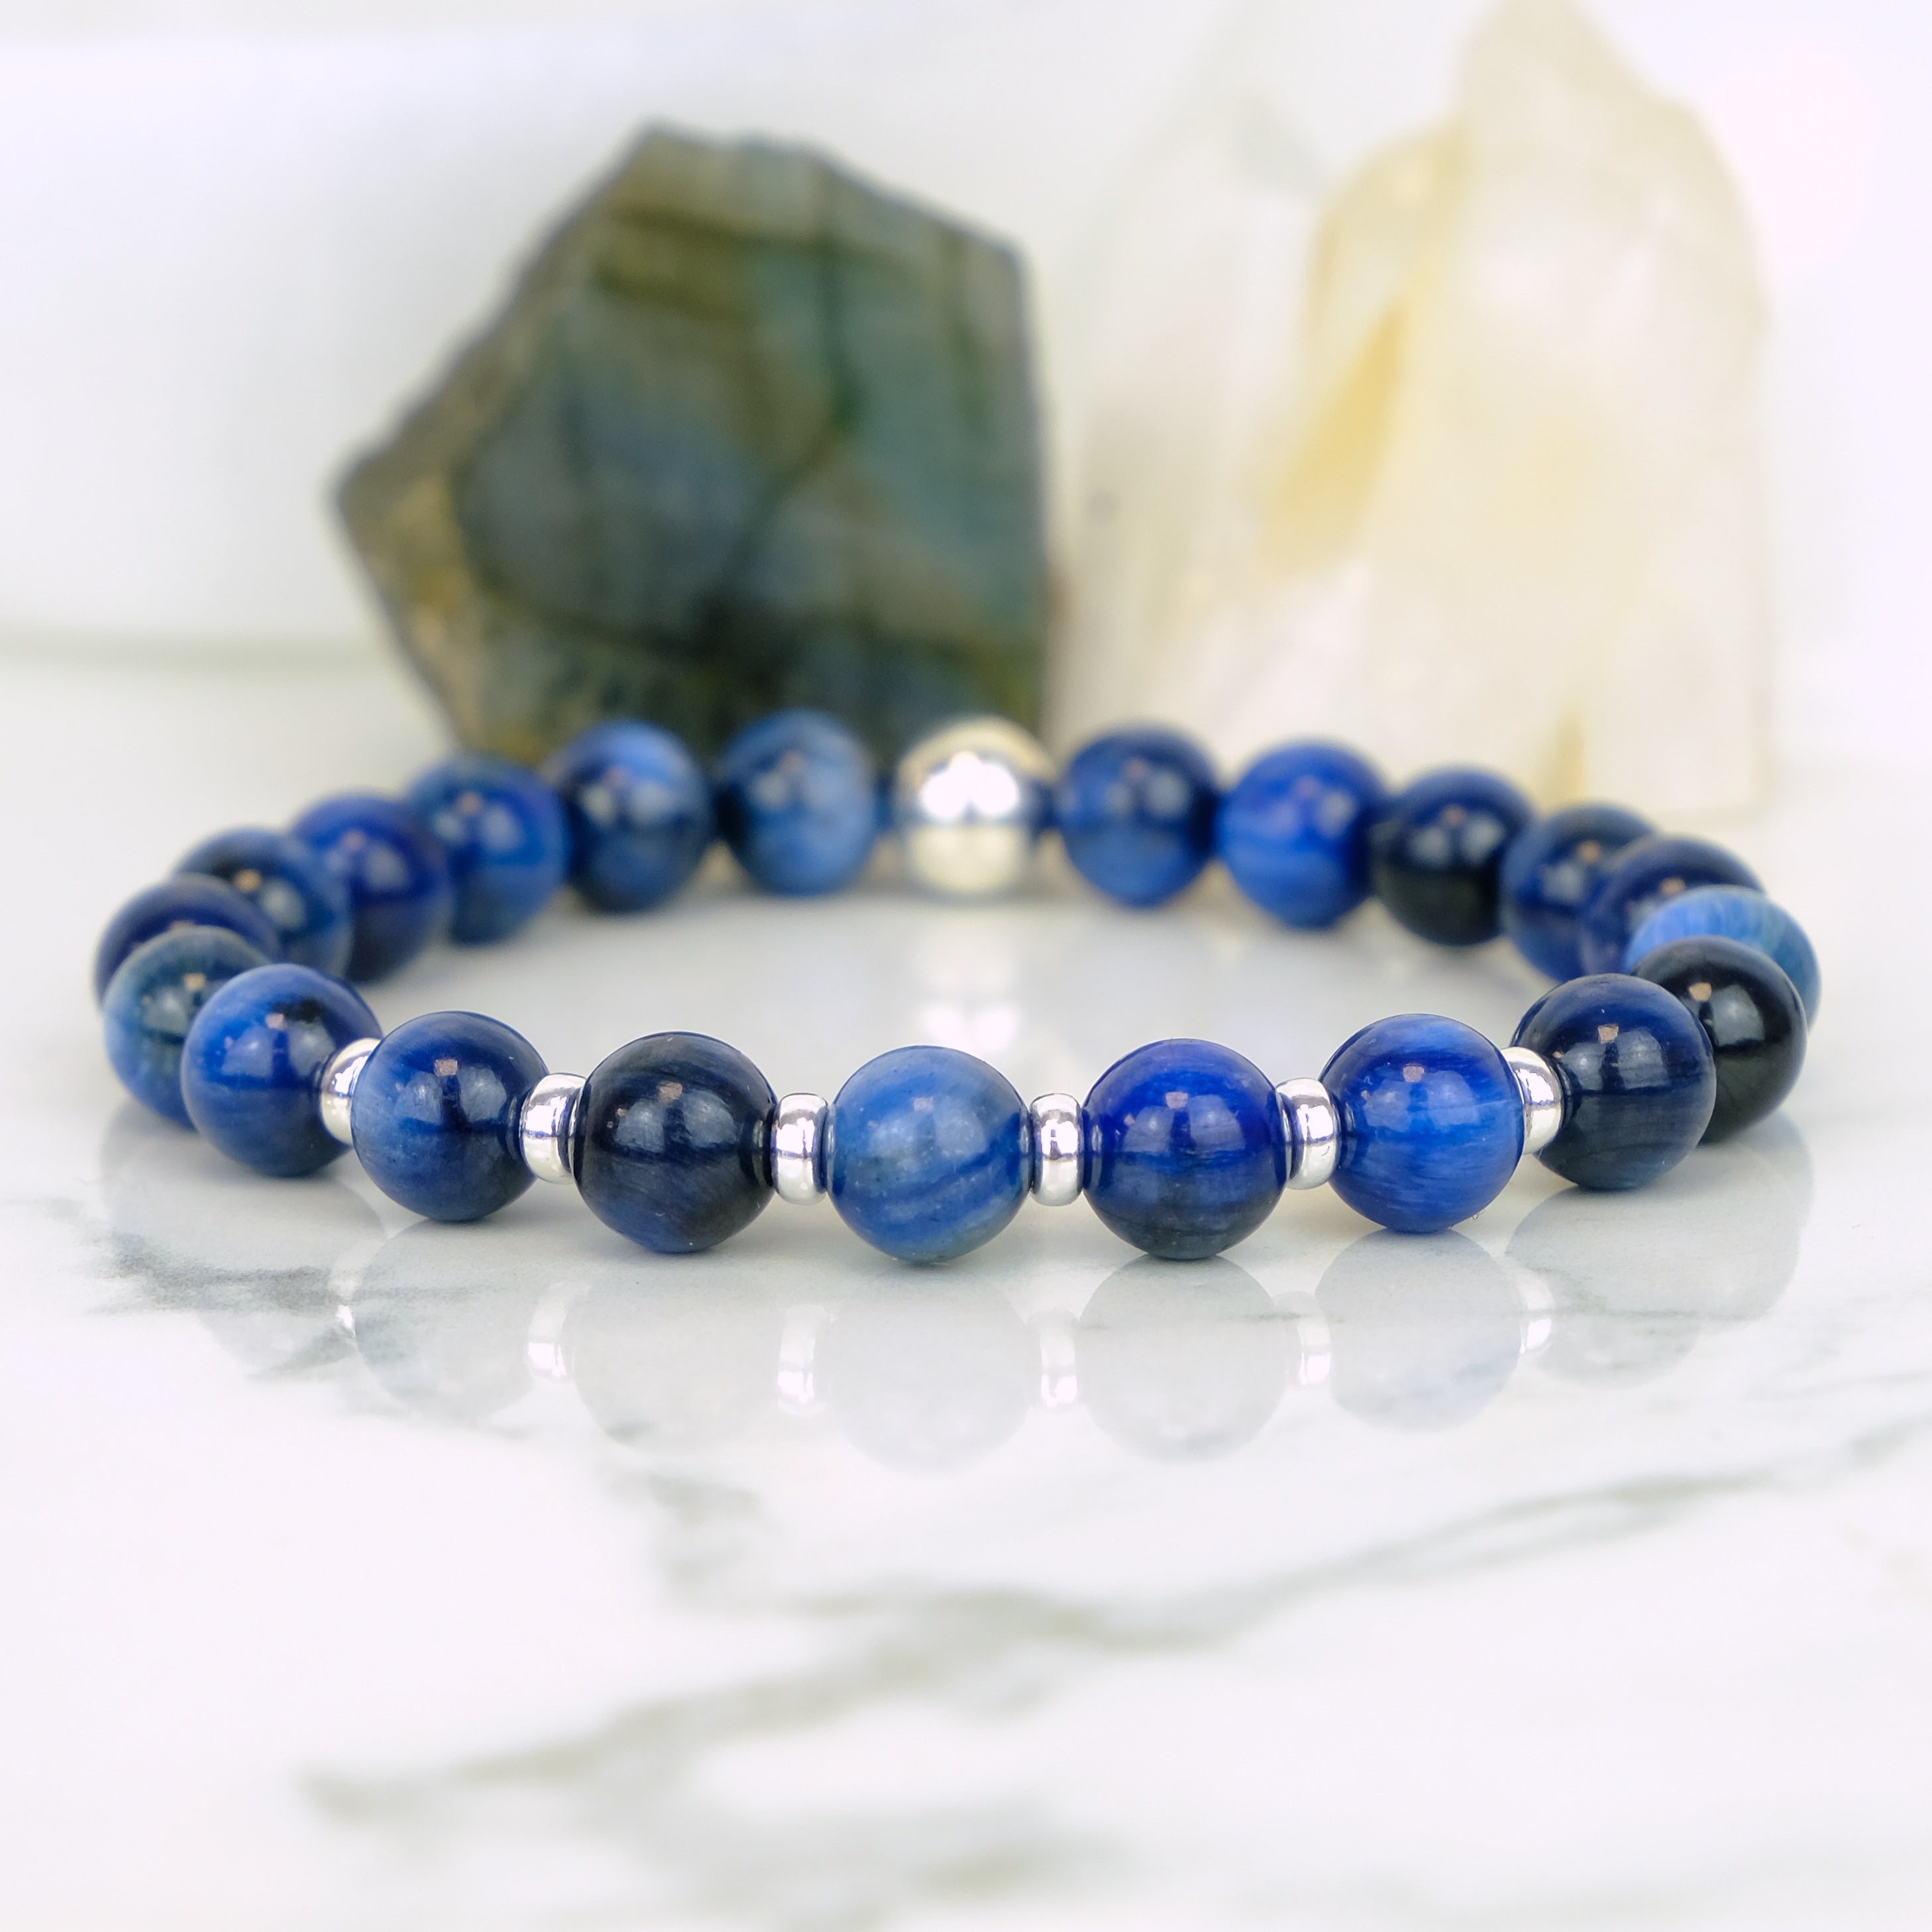 Kyanite gemstone bracelet with Silver accents 